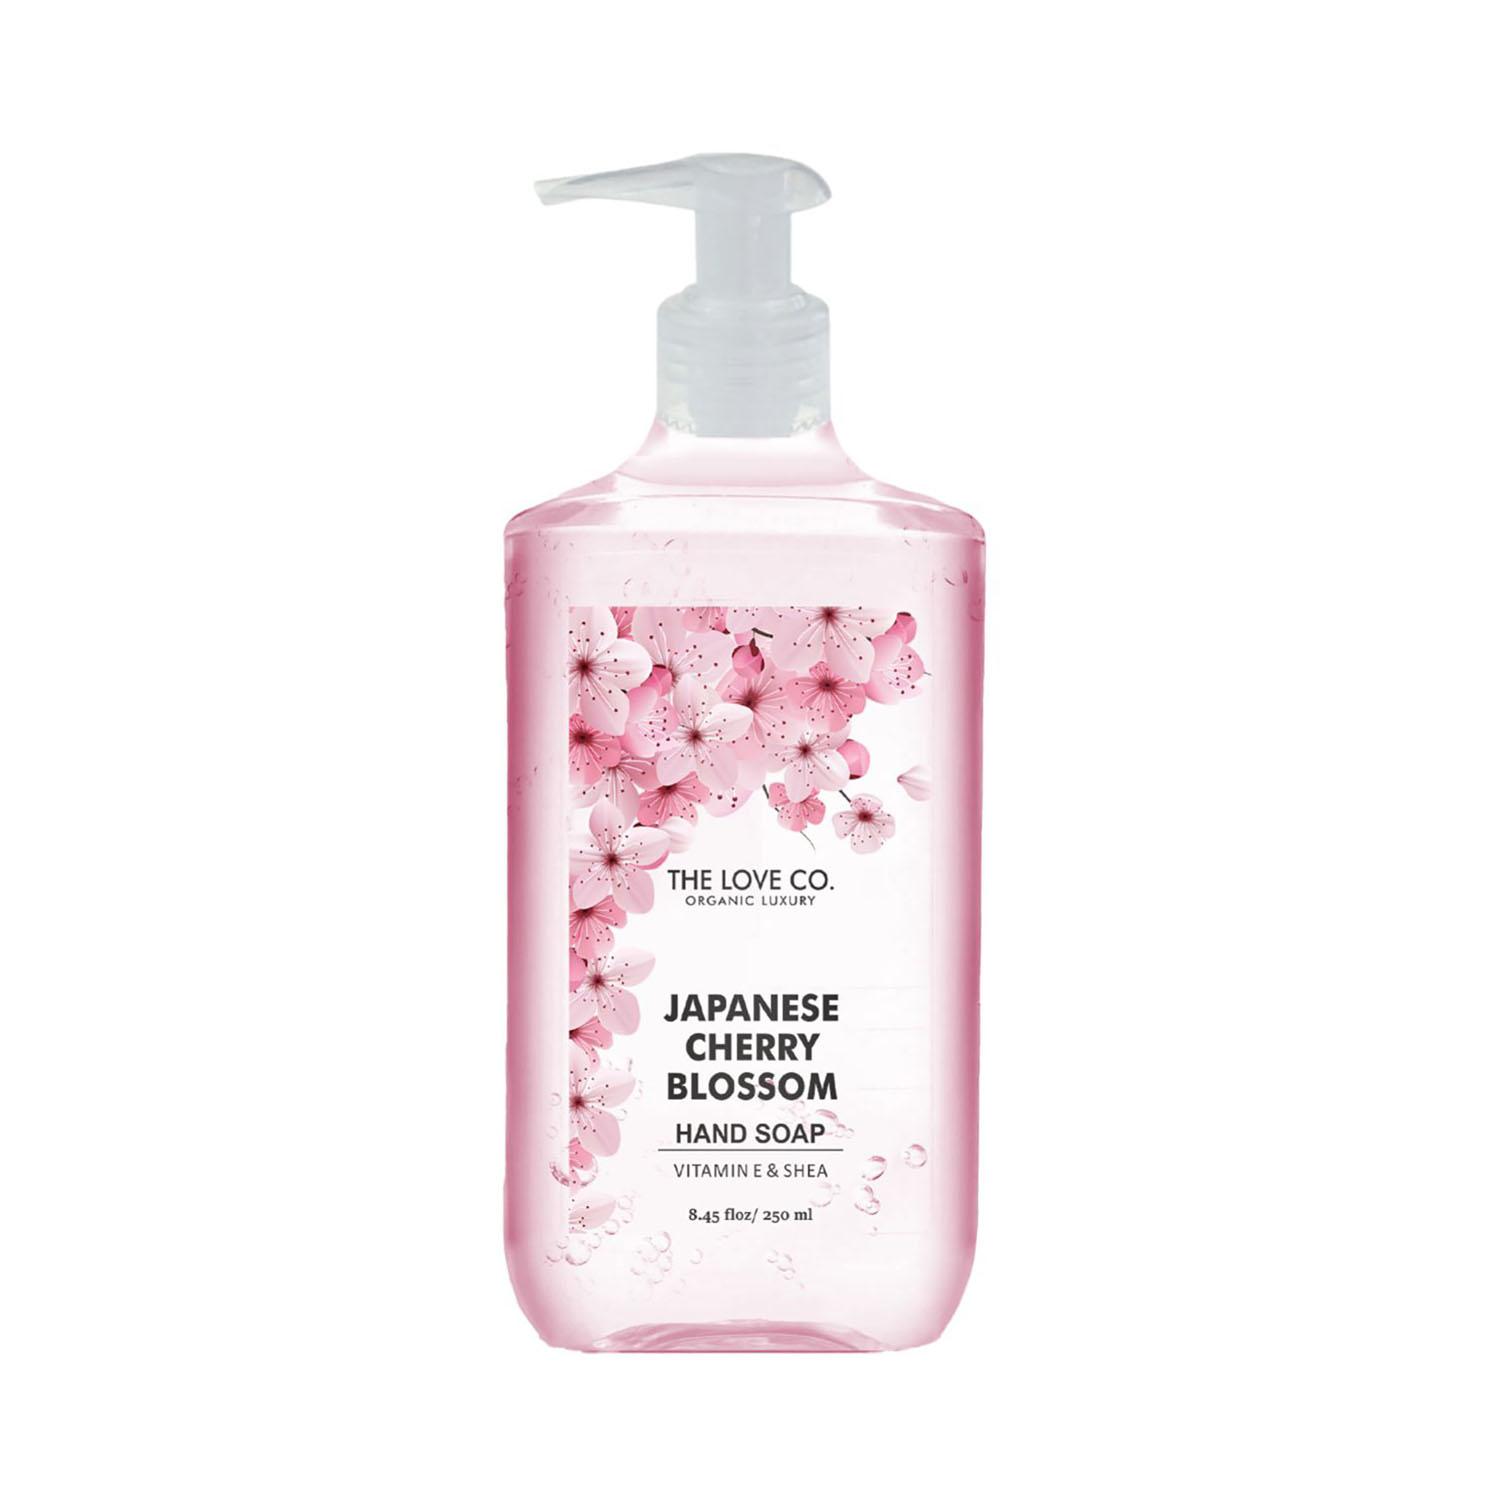 THE LOVE CO. | THE LOVE CO. Japanese Cherry Blossom Hand Soap For Moisturized Hands (250ml)